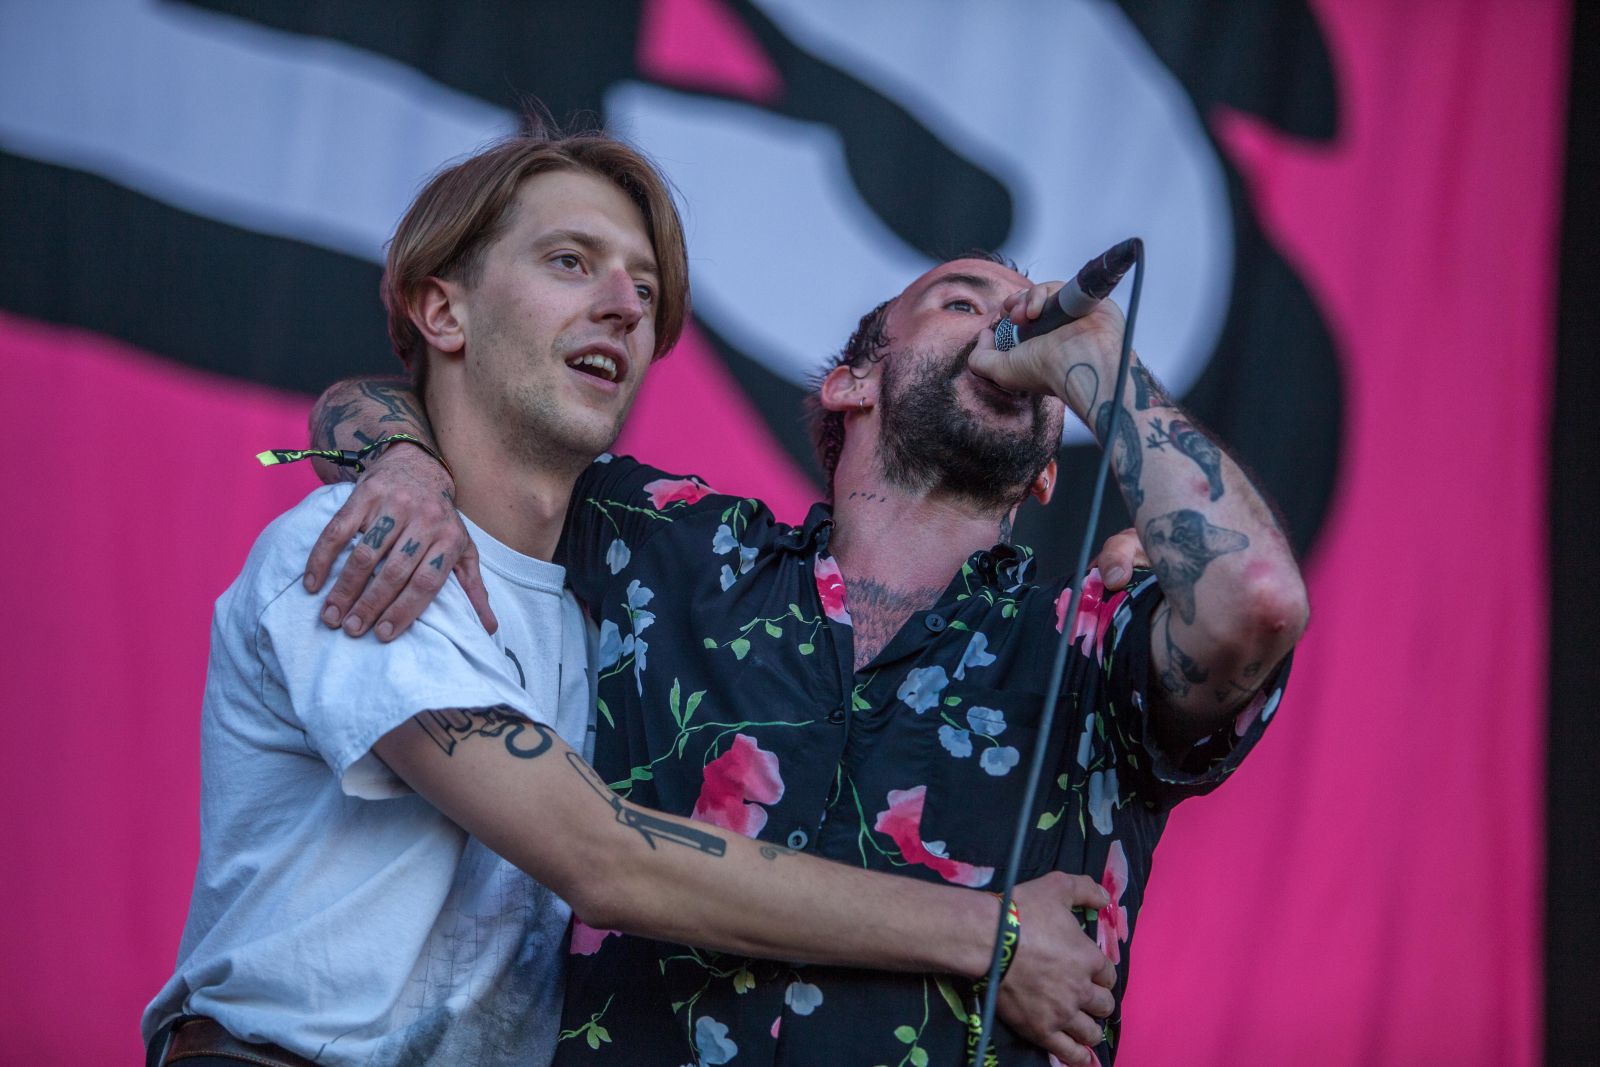 Joe Talbot and Danny at The Downs Festival, 2019